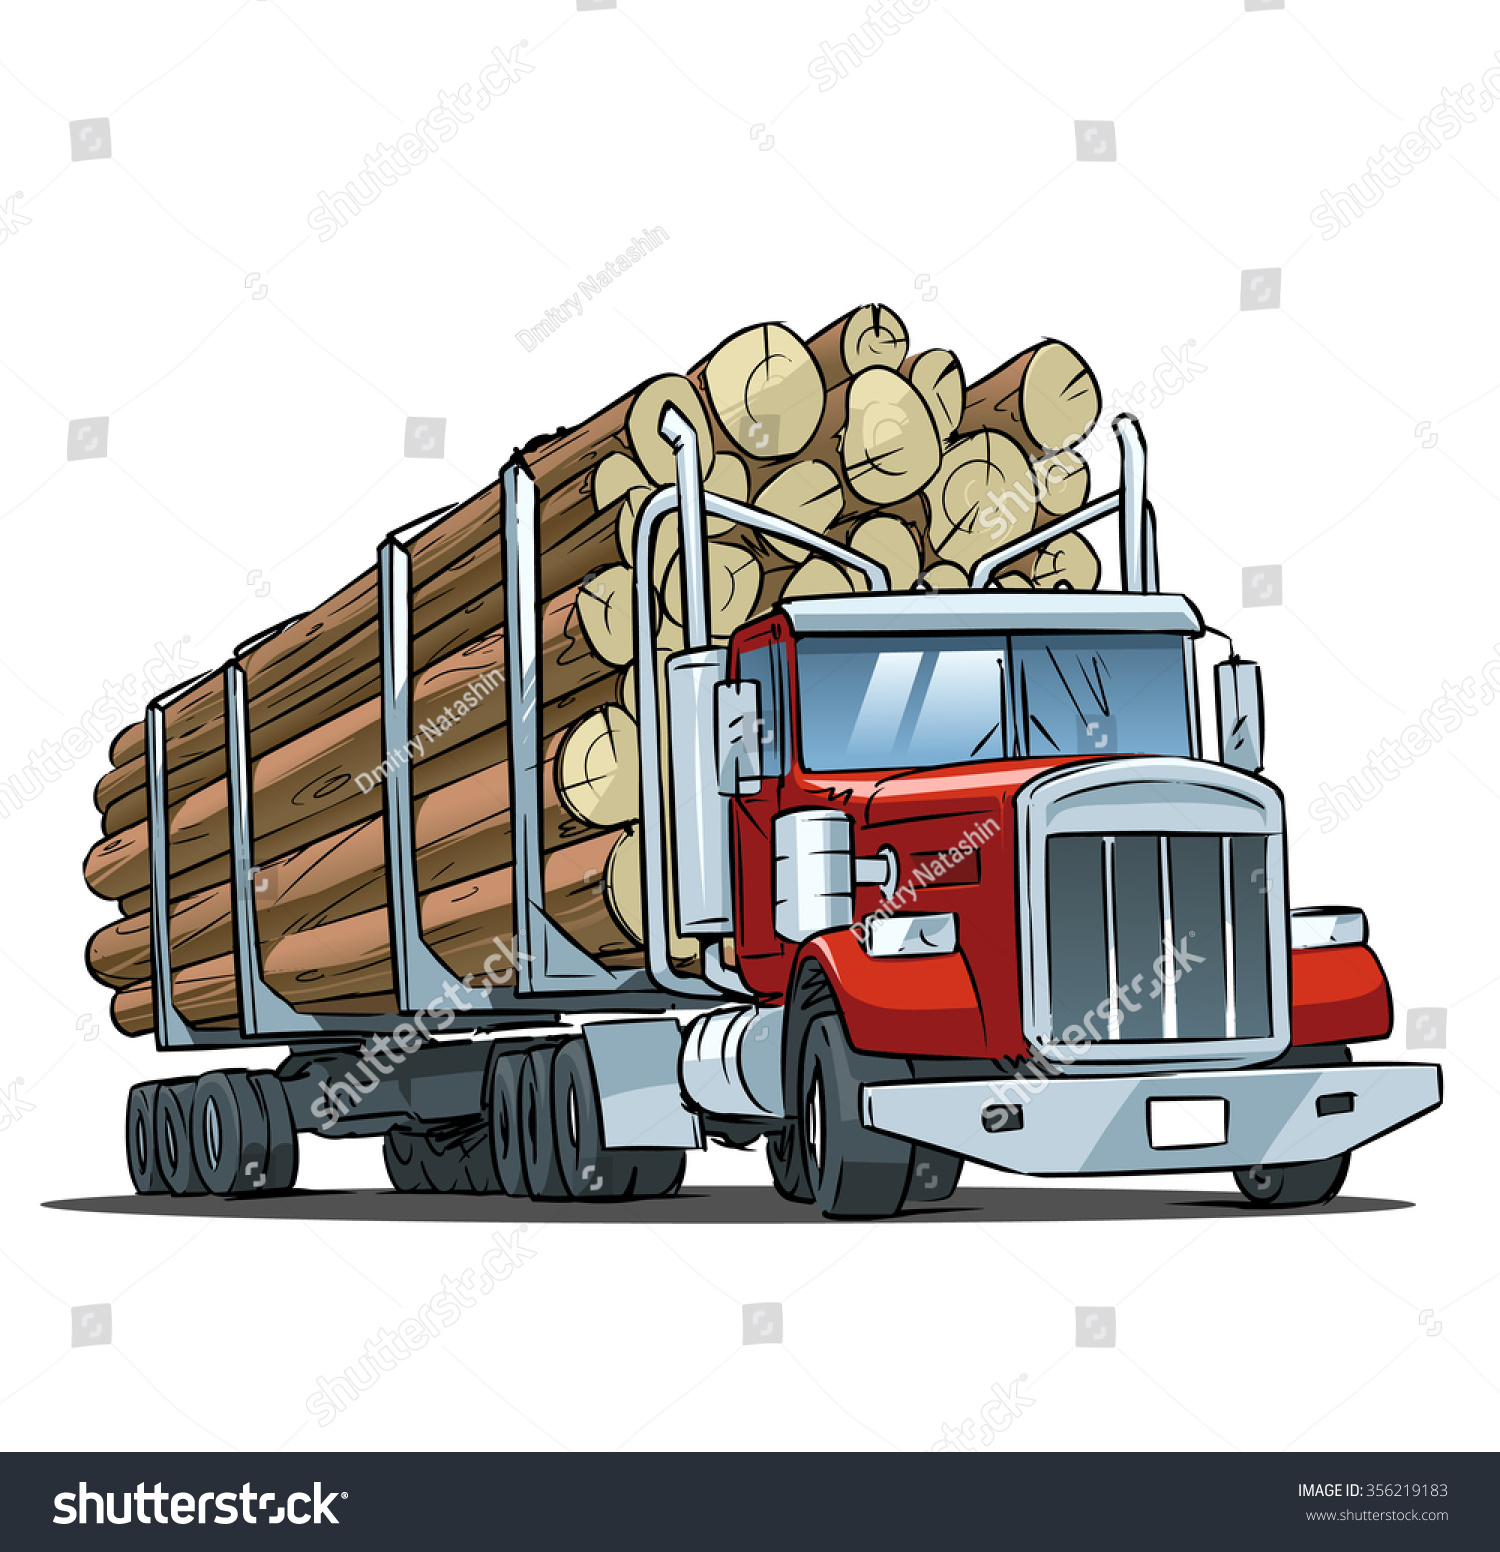 Logging Truck Isolated On White Background Stock Vector ...